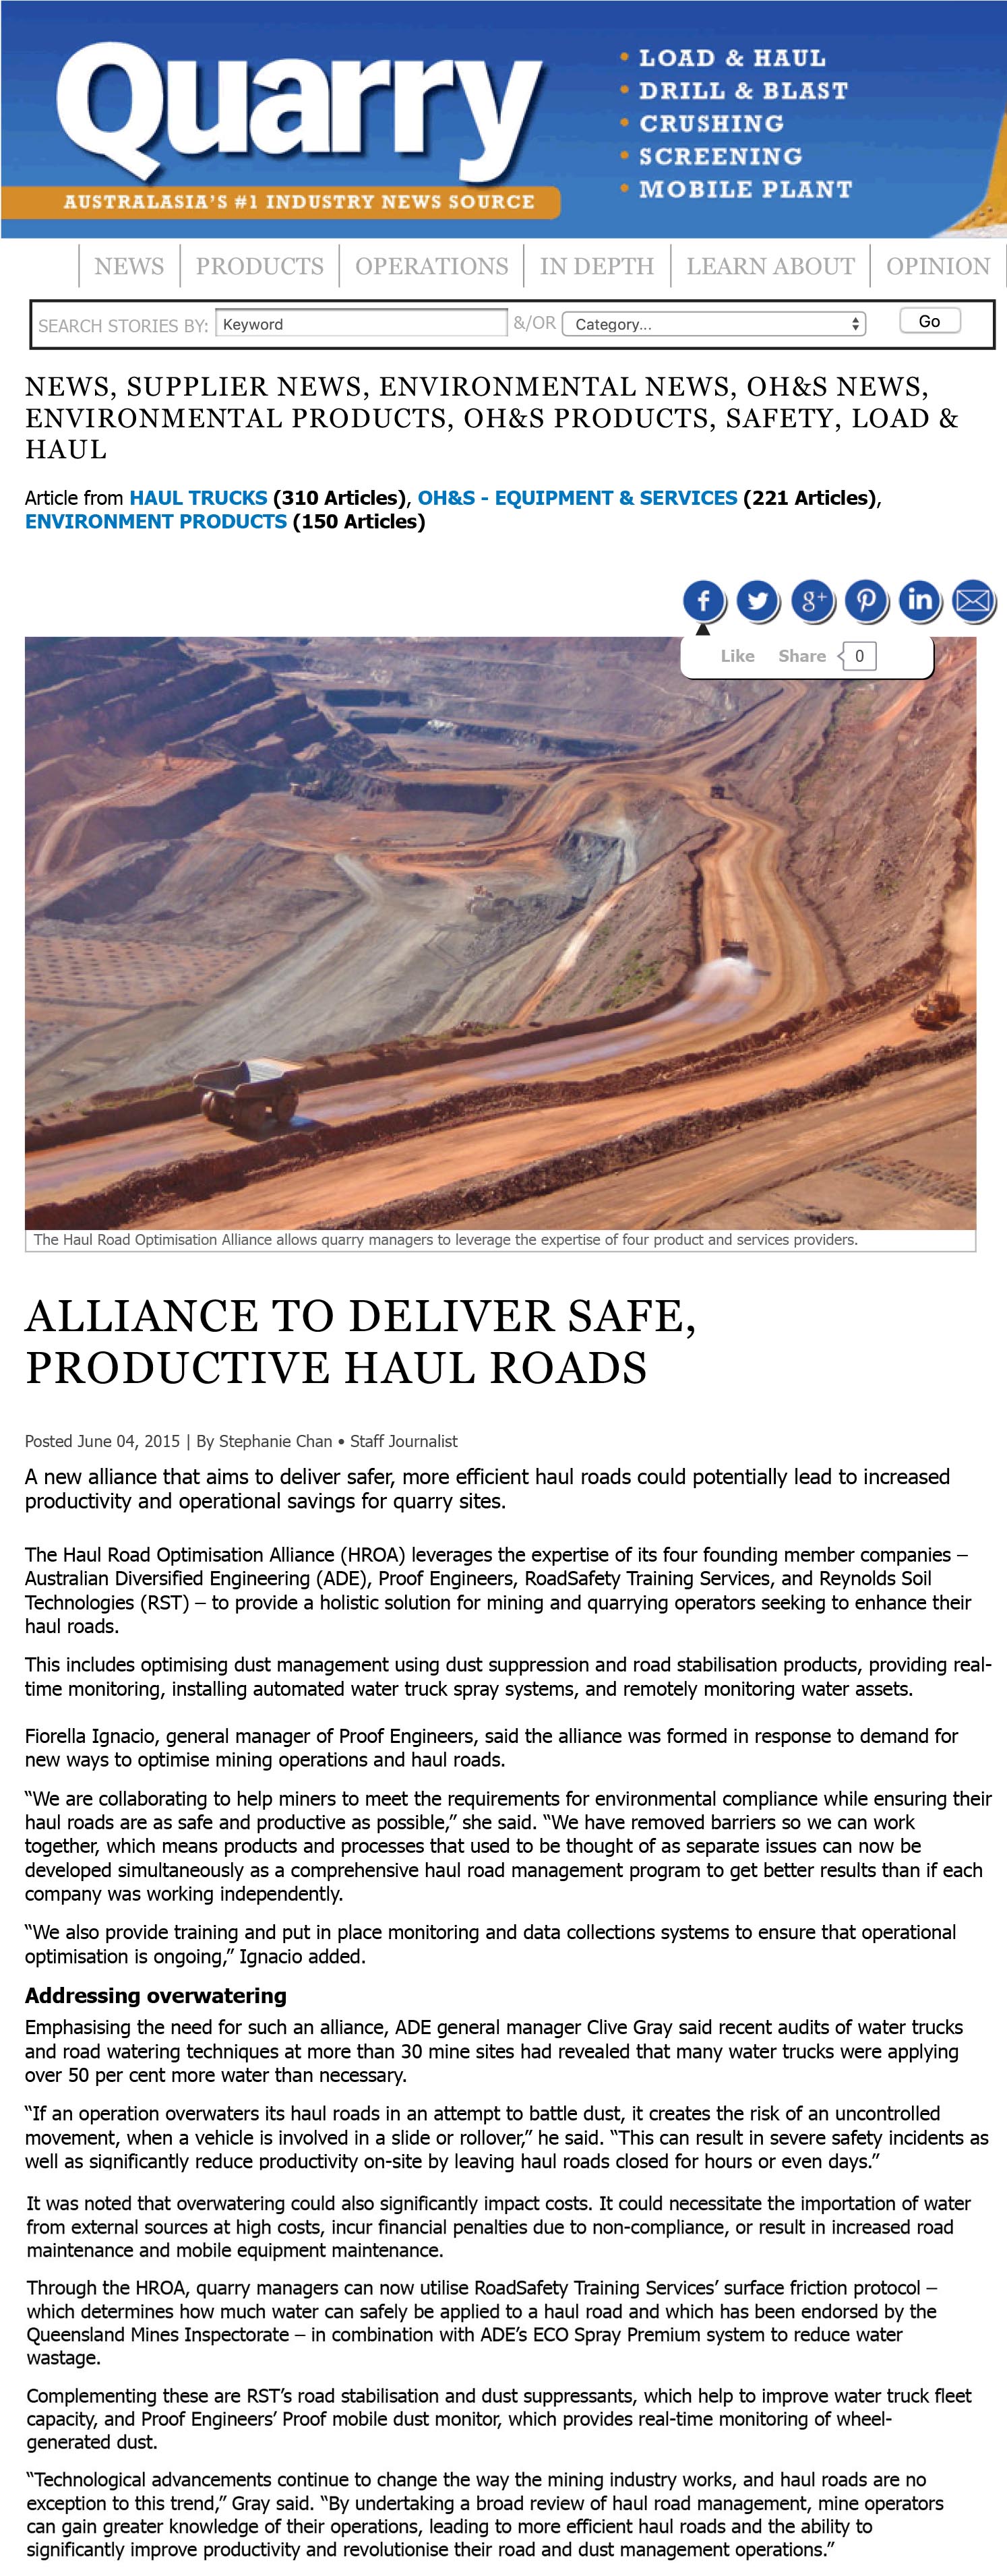 Alliance to deliver safe, productive haul roads - Quarry Magazine_ Quarry Mining and Aggregate News-1